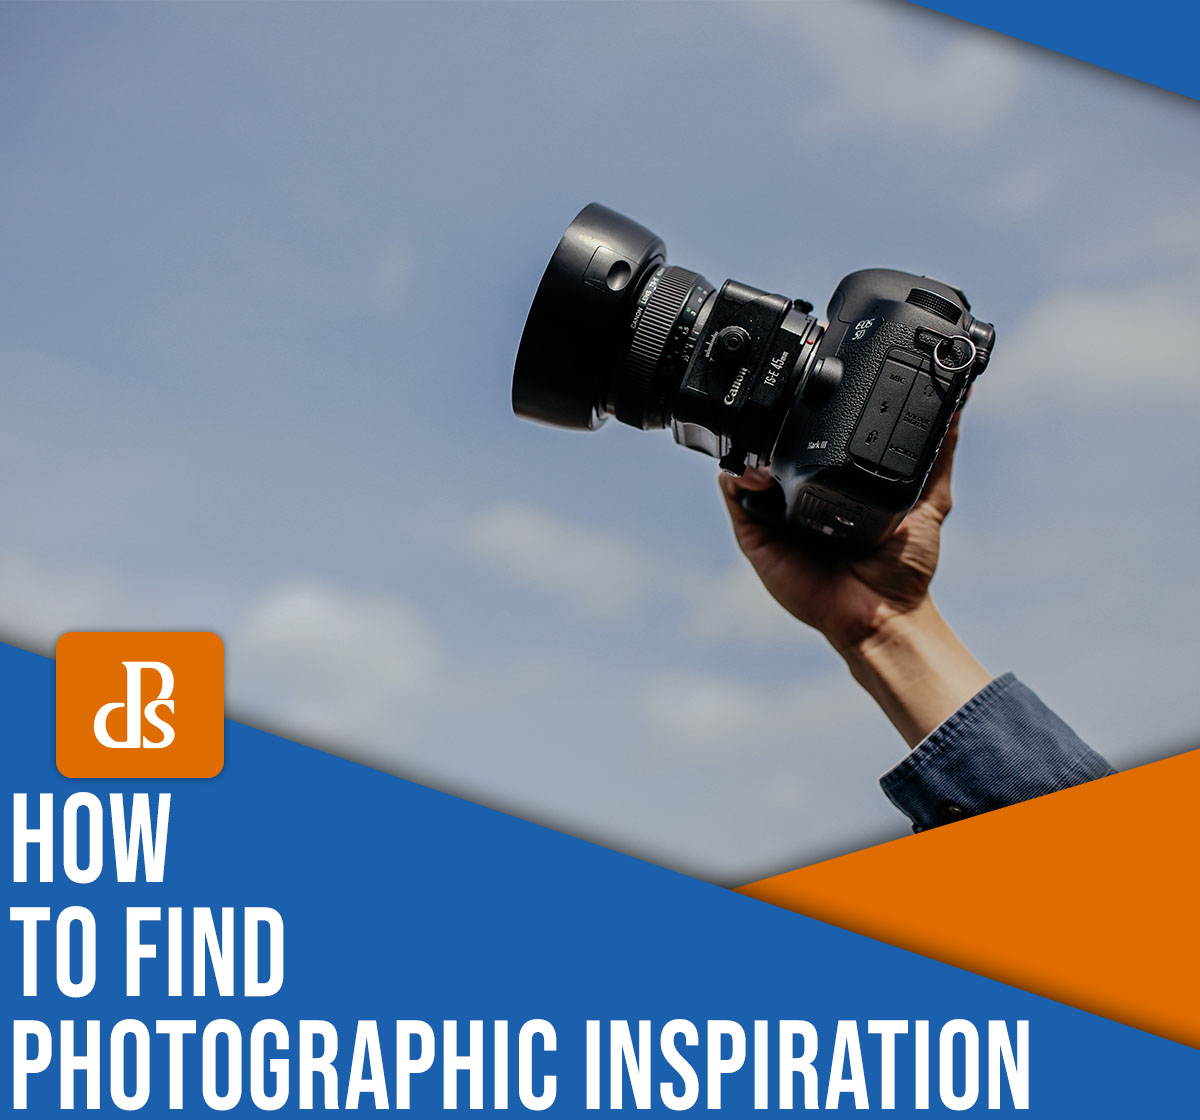 How to find photographic inspiration